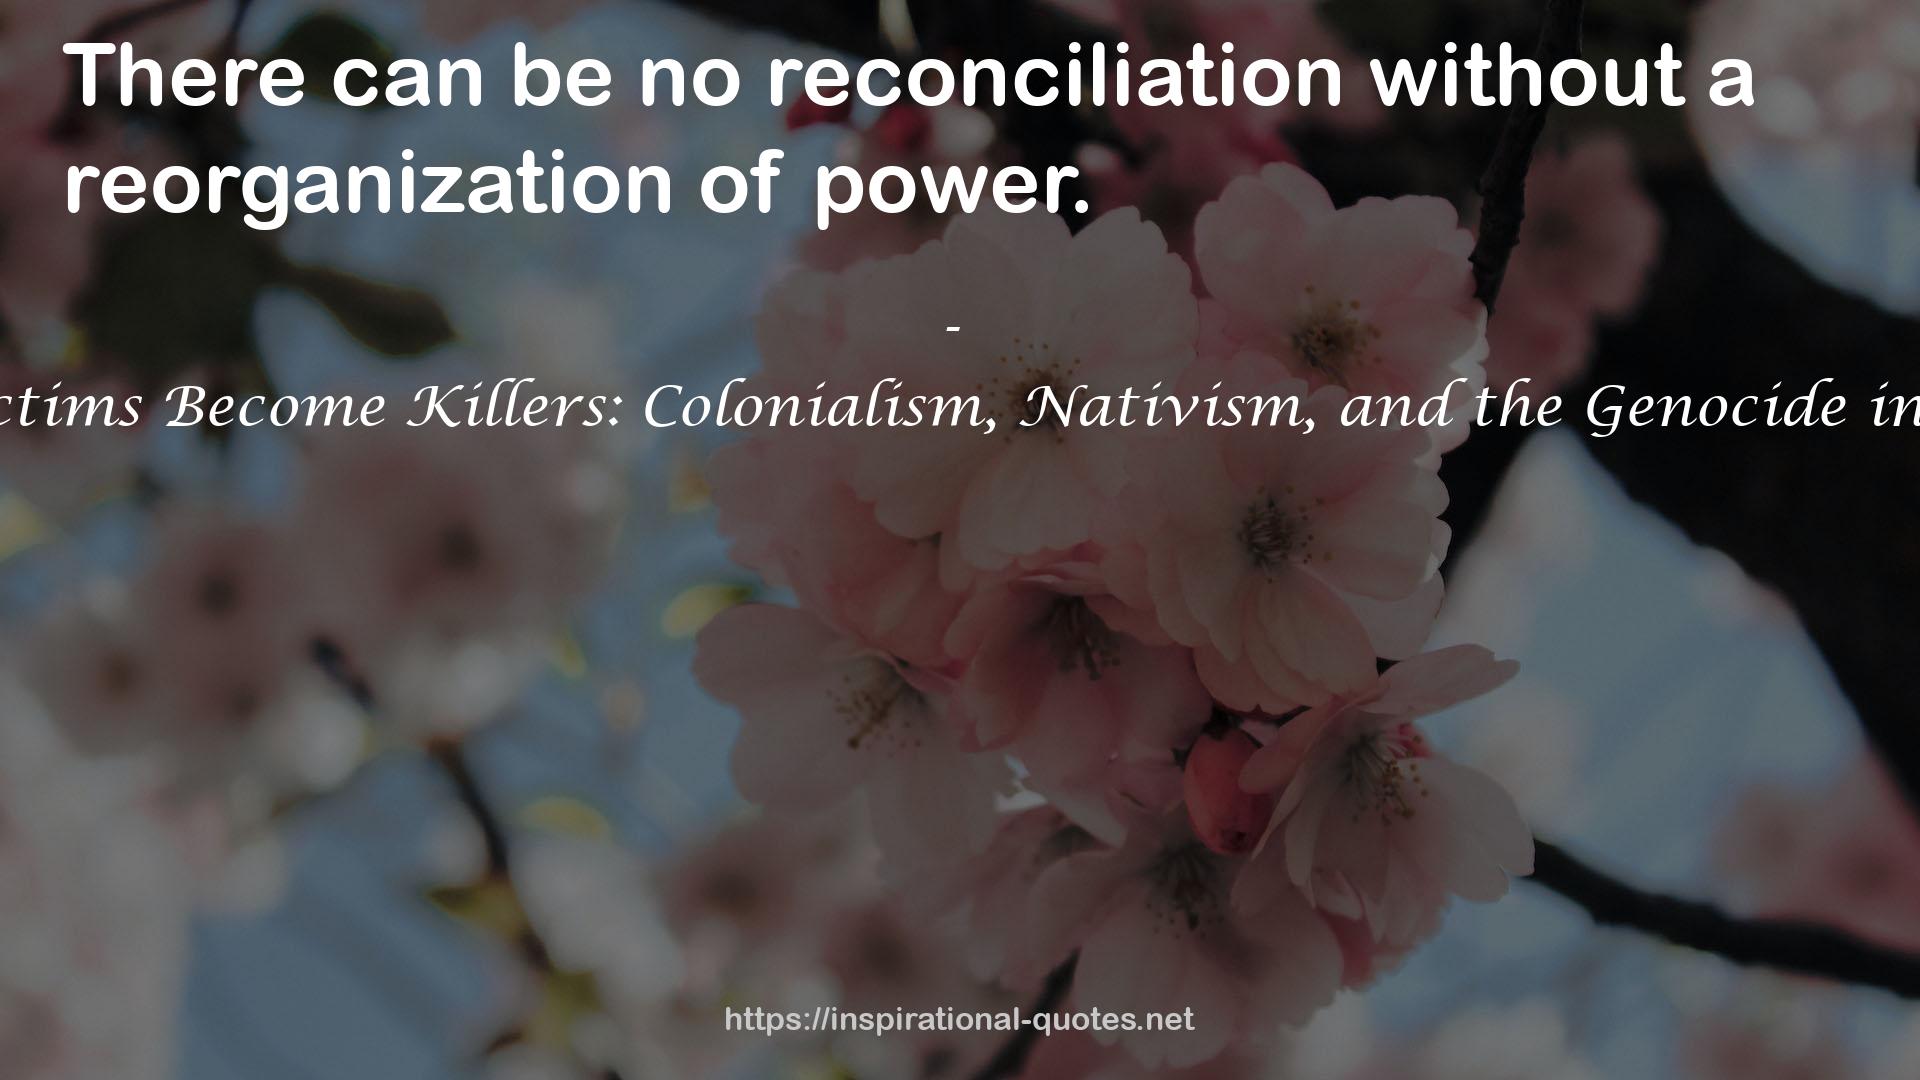 When Victims Become Killers: Colonialism, Nativism, and the Genocide in Rwanda QUOTES